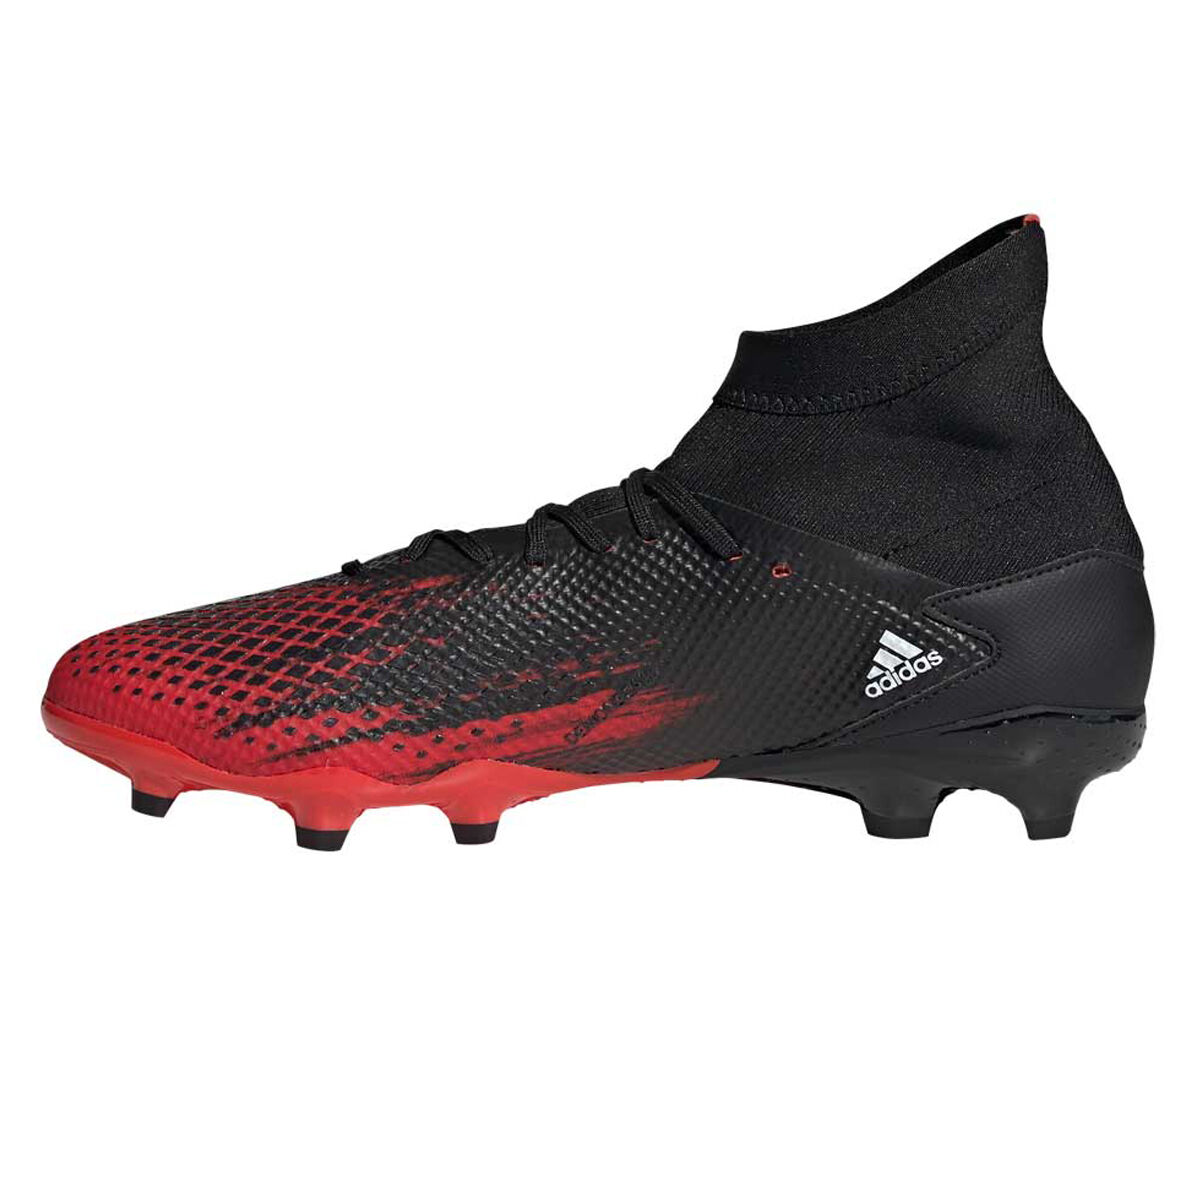 touch boots rebel sport